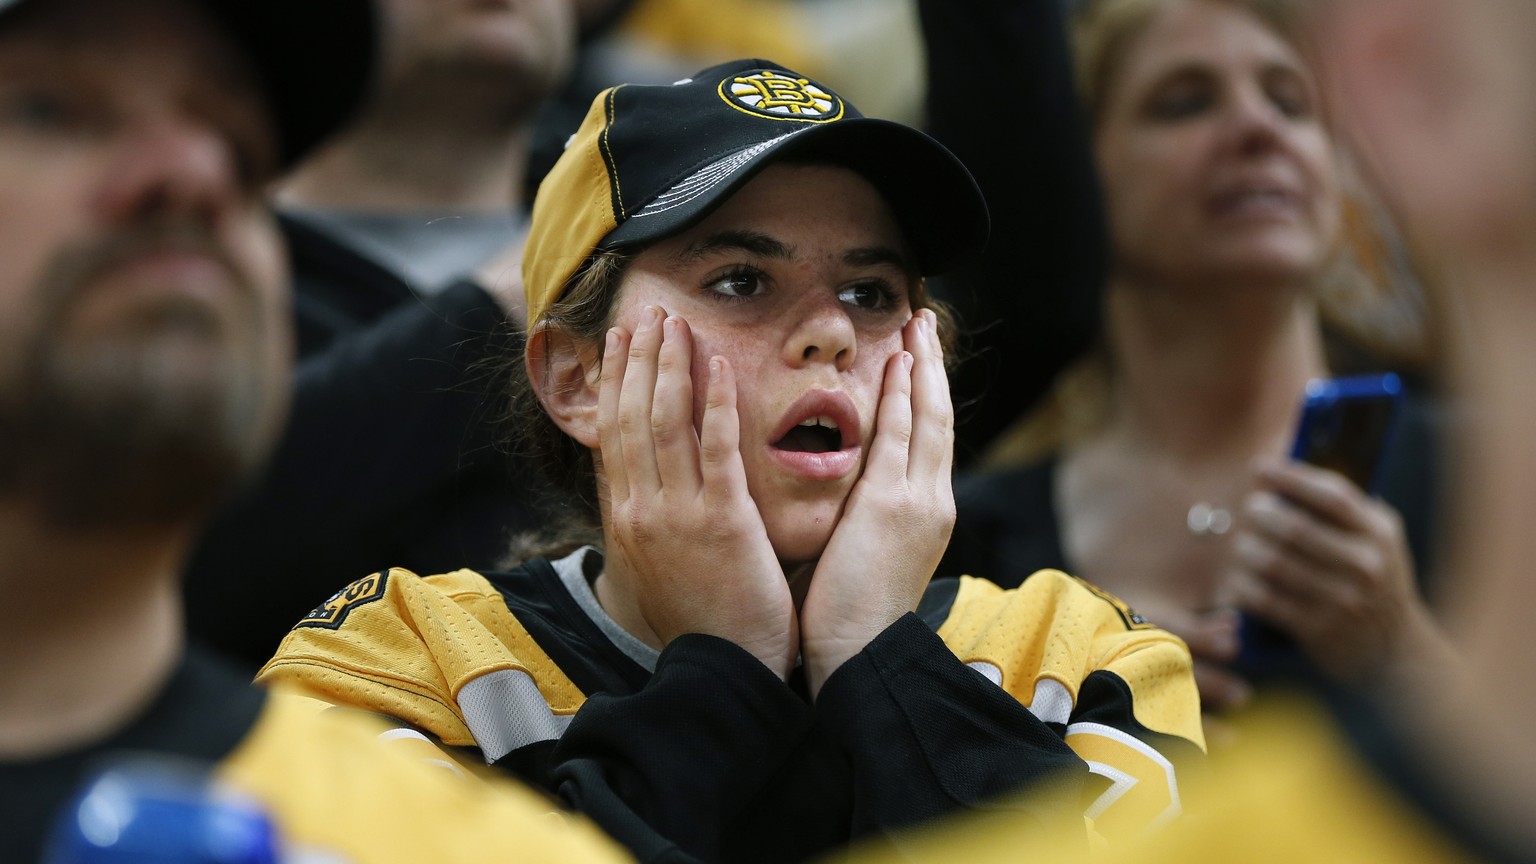 Boston Bruins fans watch the closing minutes of Game 5 of the NHL hockey Stanley Cup Final between the Bruins and the St. Louis Blues, Thursday, June 6, 2019, in Boston. (AP Photo/Michael Dwyer)